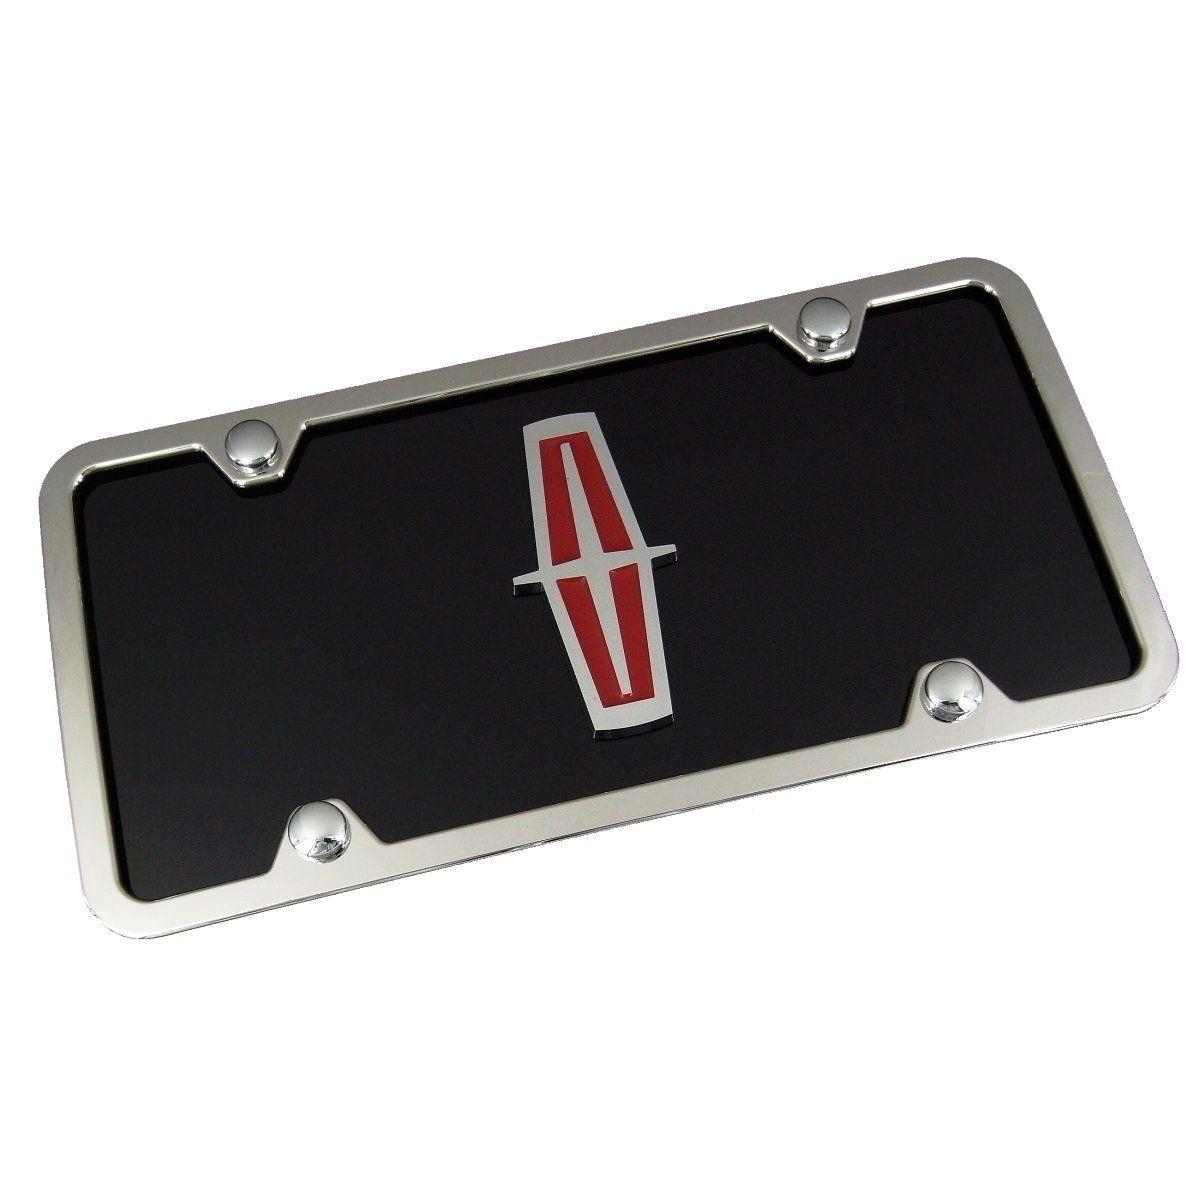 Red Lincoln Logo - Amazon.com: Lincoln Chrome Logo W/ Red Fill On Black License Plate + ...